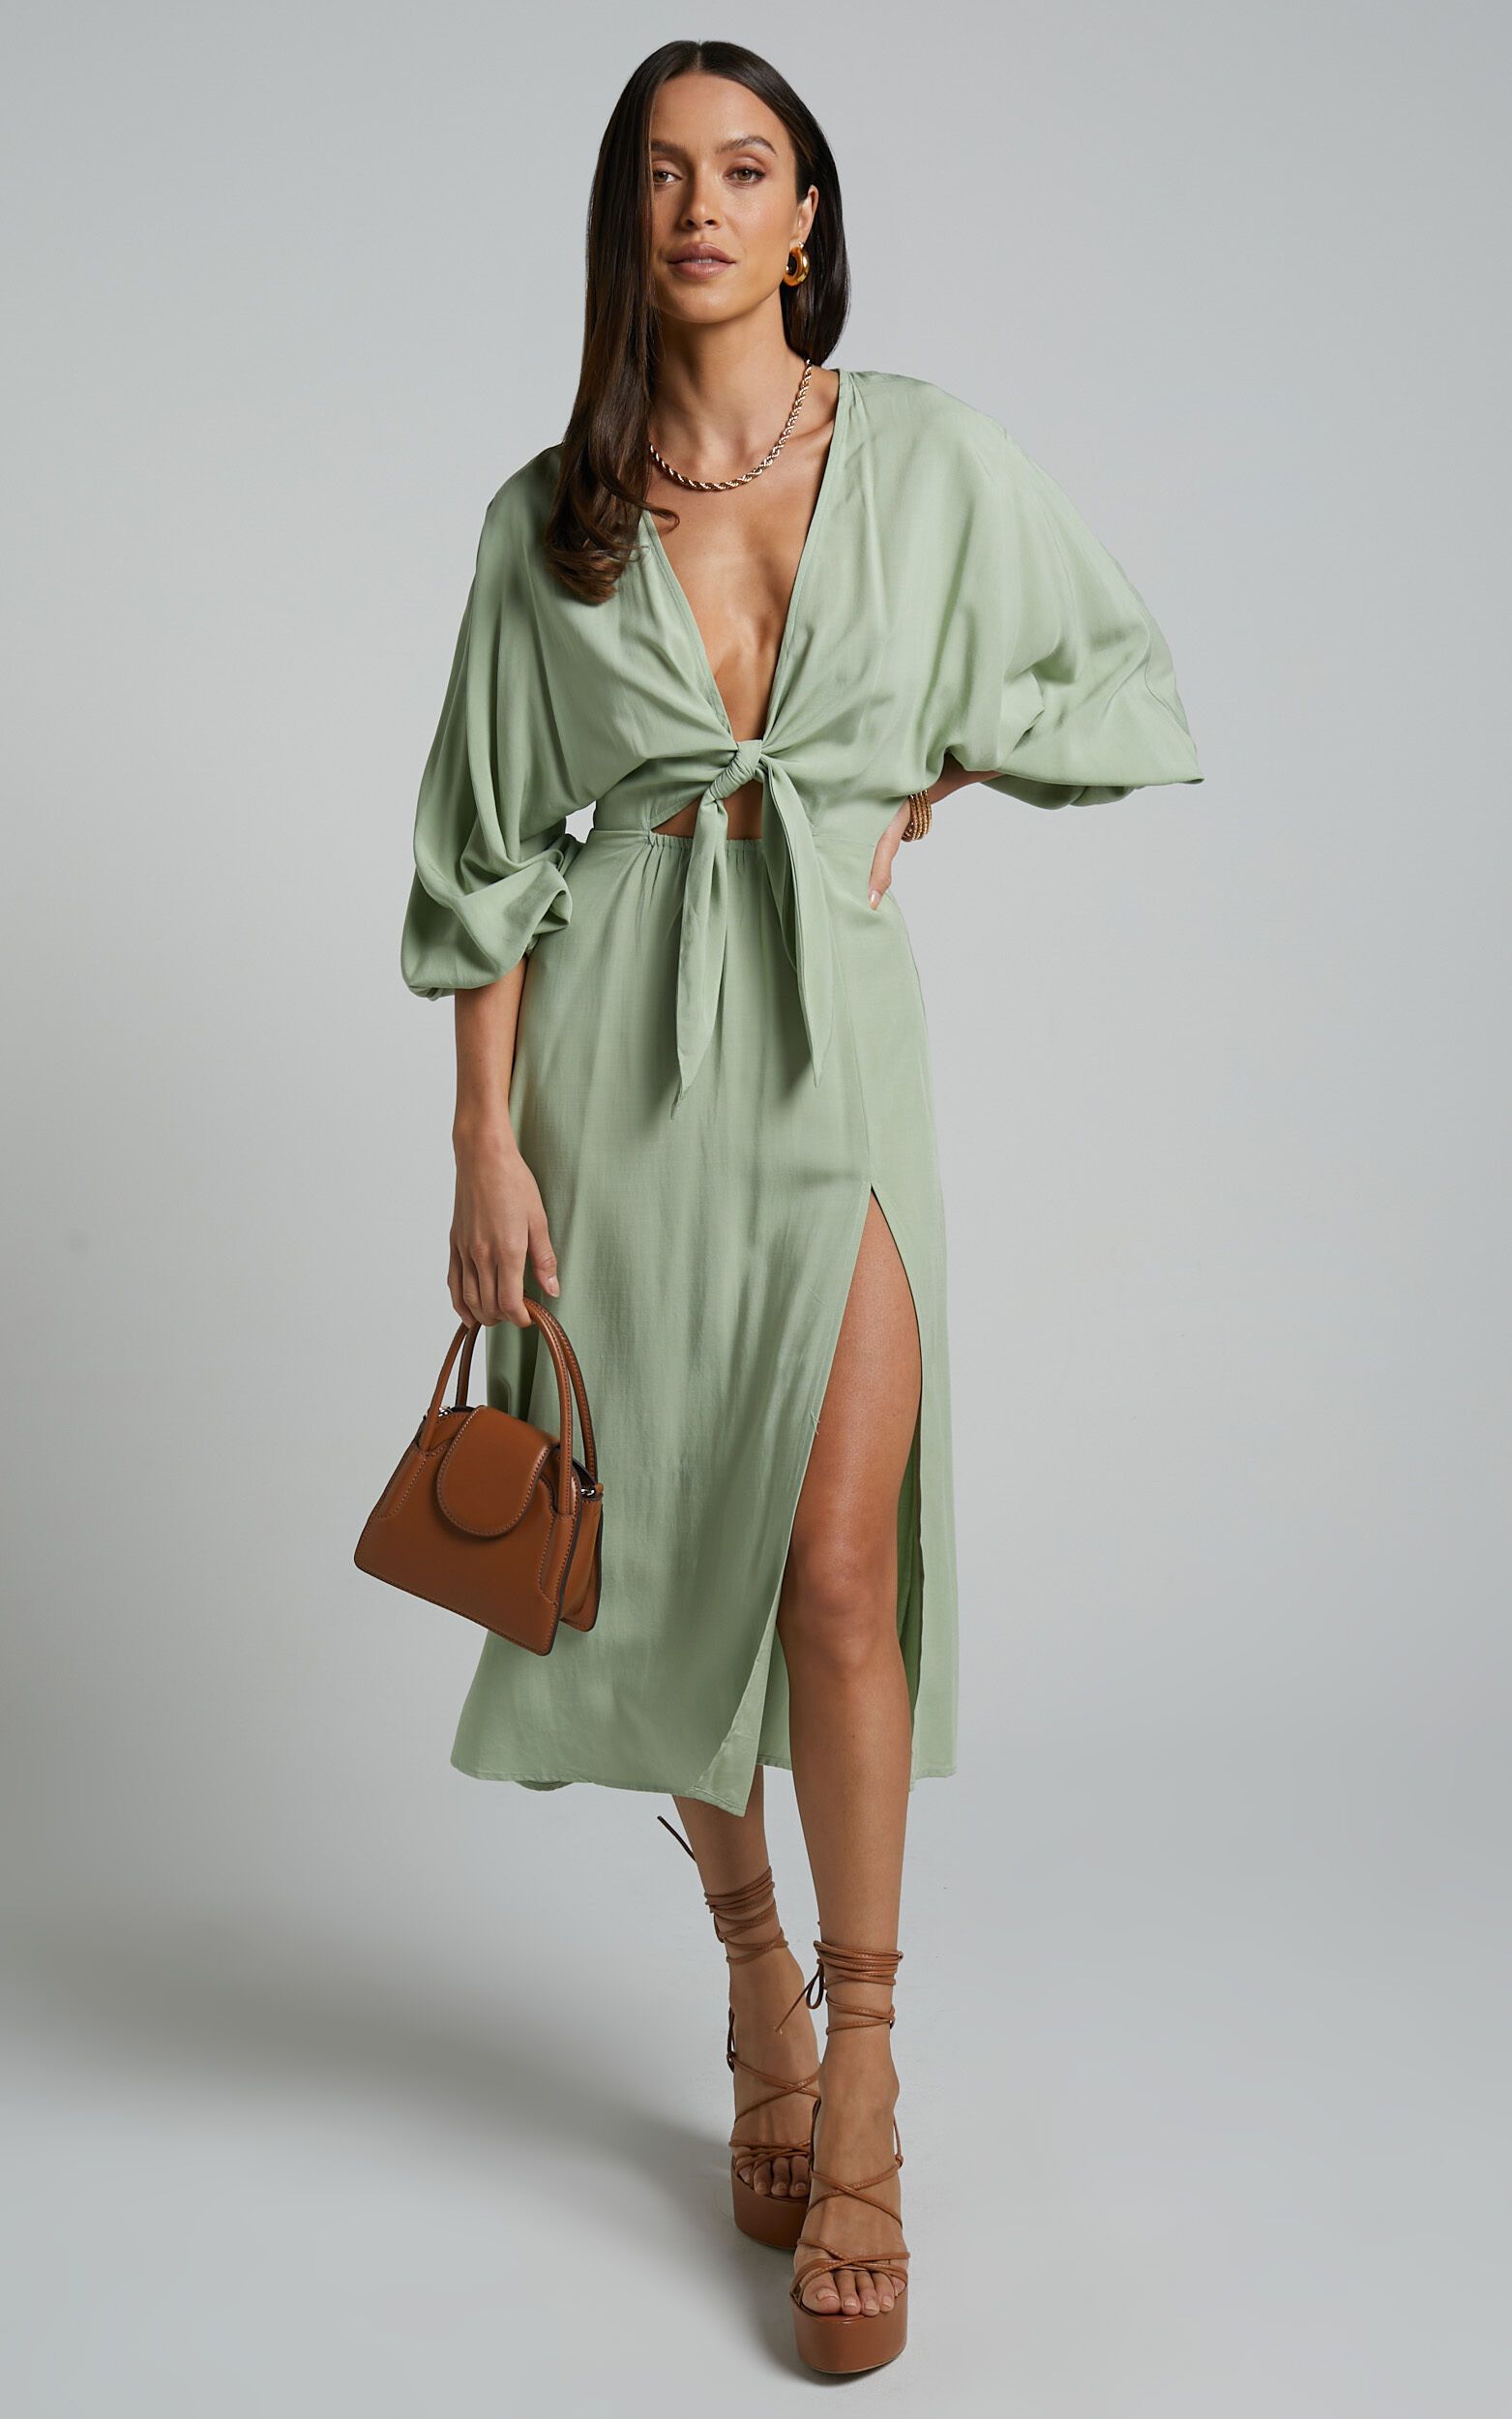 Tyricia Midi Dress - Long Sleeve Tie Front Cut Out Dress in Sage | Showpo (US, UK & Europe)